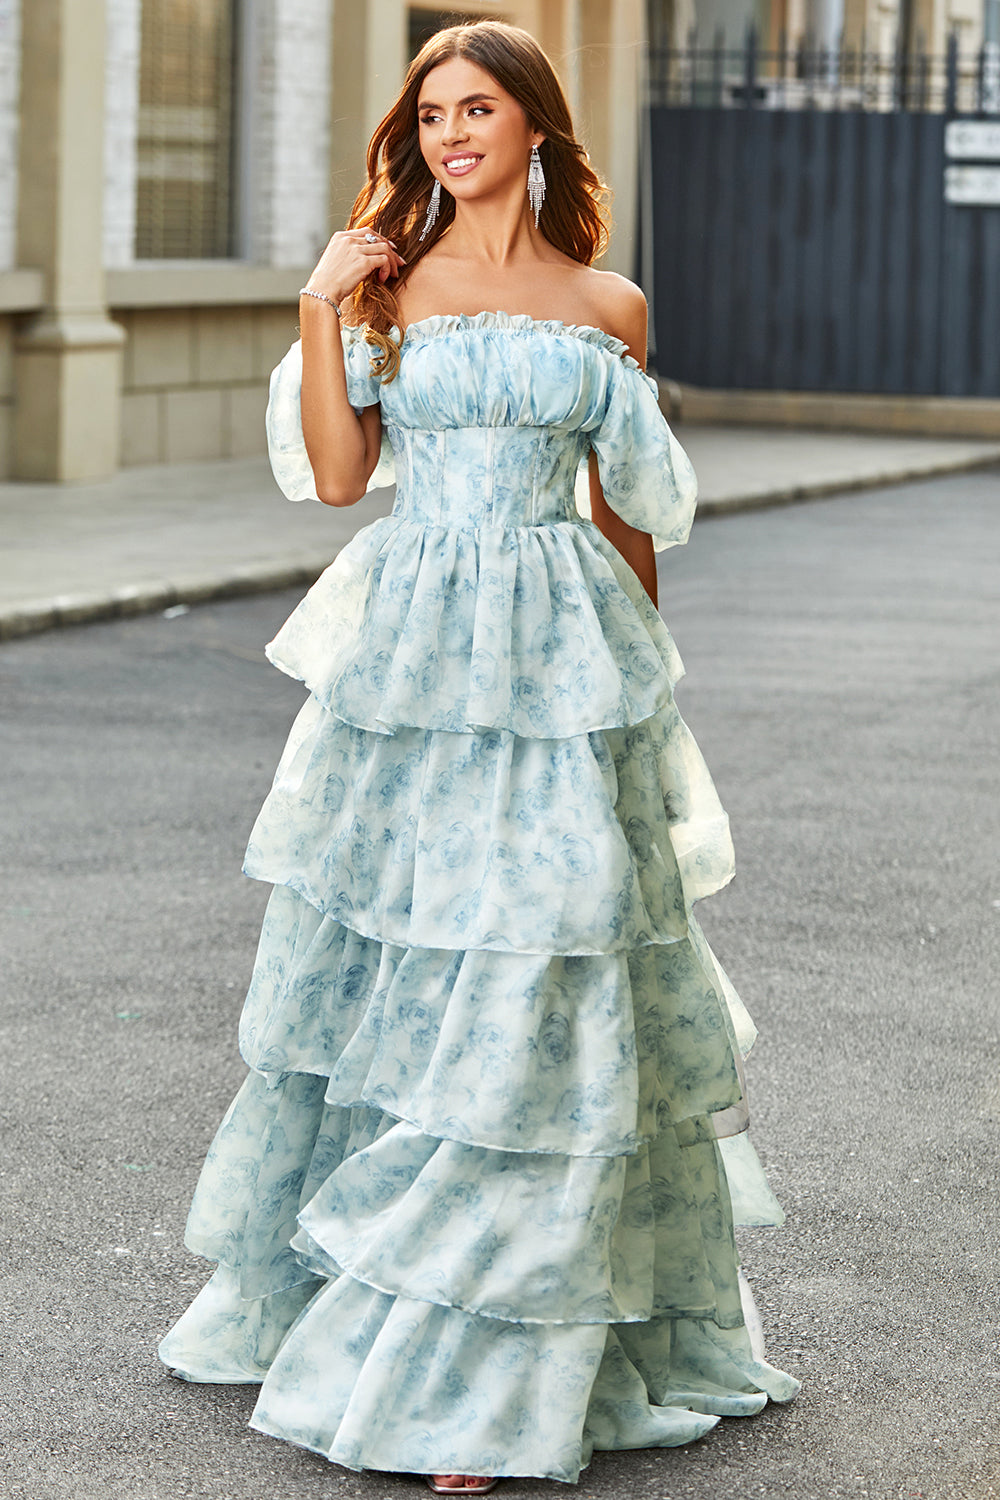 A Line Square Neck Light Blue Tiered Floral Long Prom Dress med Ruffles